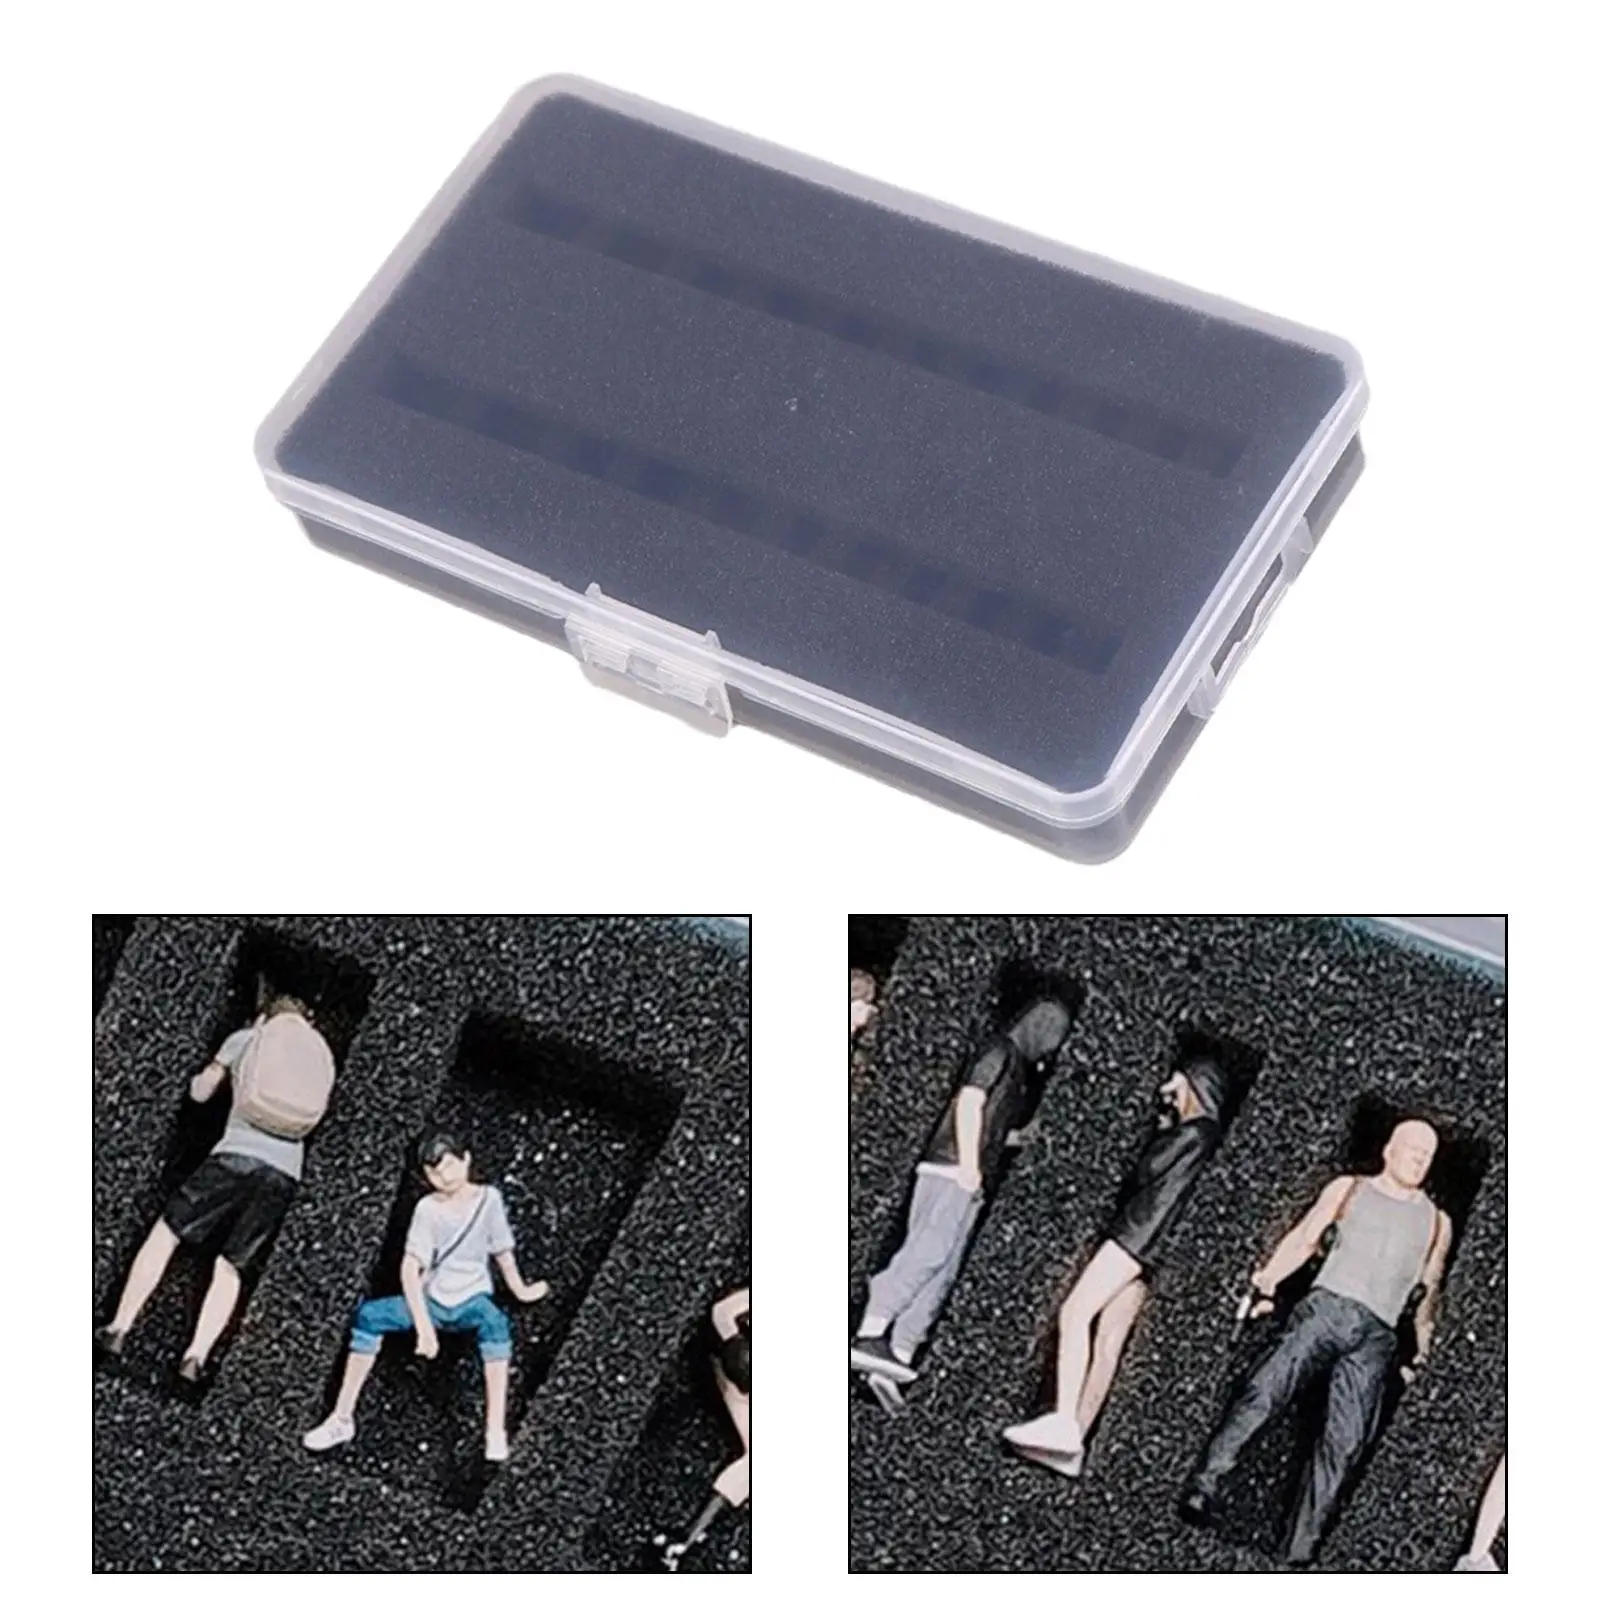 1/64 Doll Storage Box Multipurpose Protective Container Display Case for Figurines Show Household Action Figure Collectibles